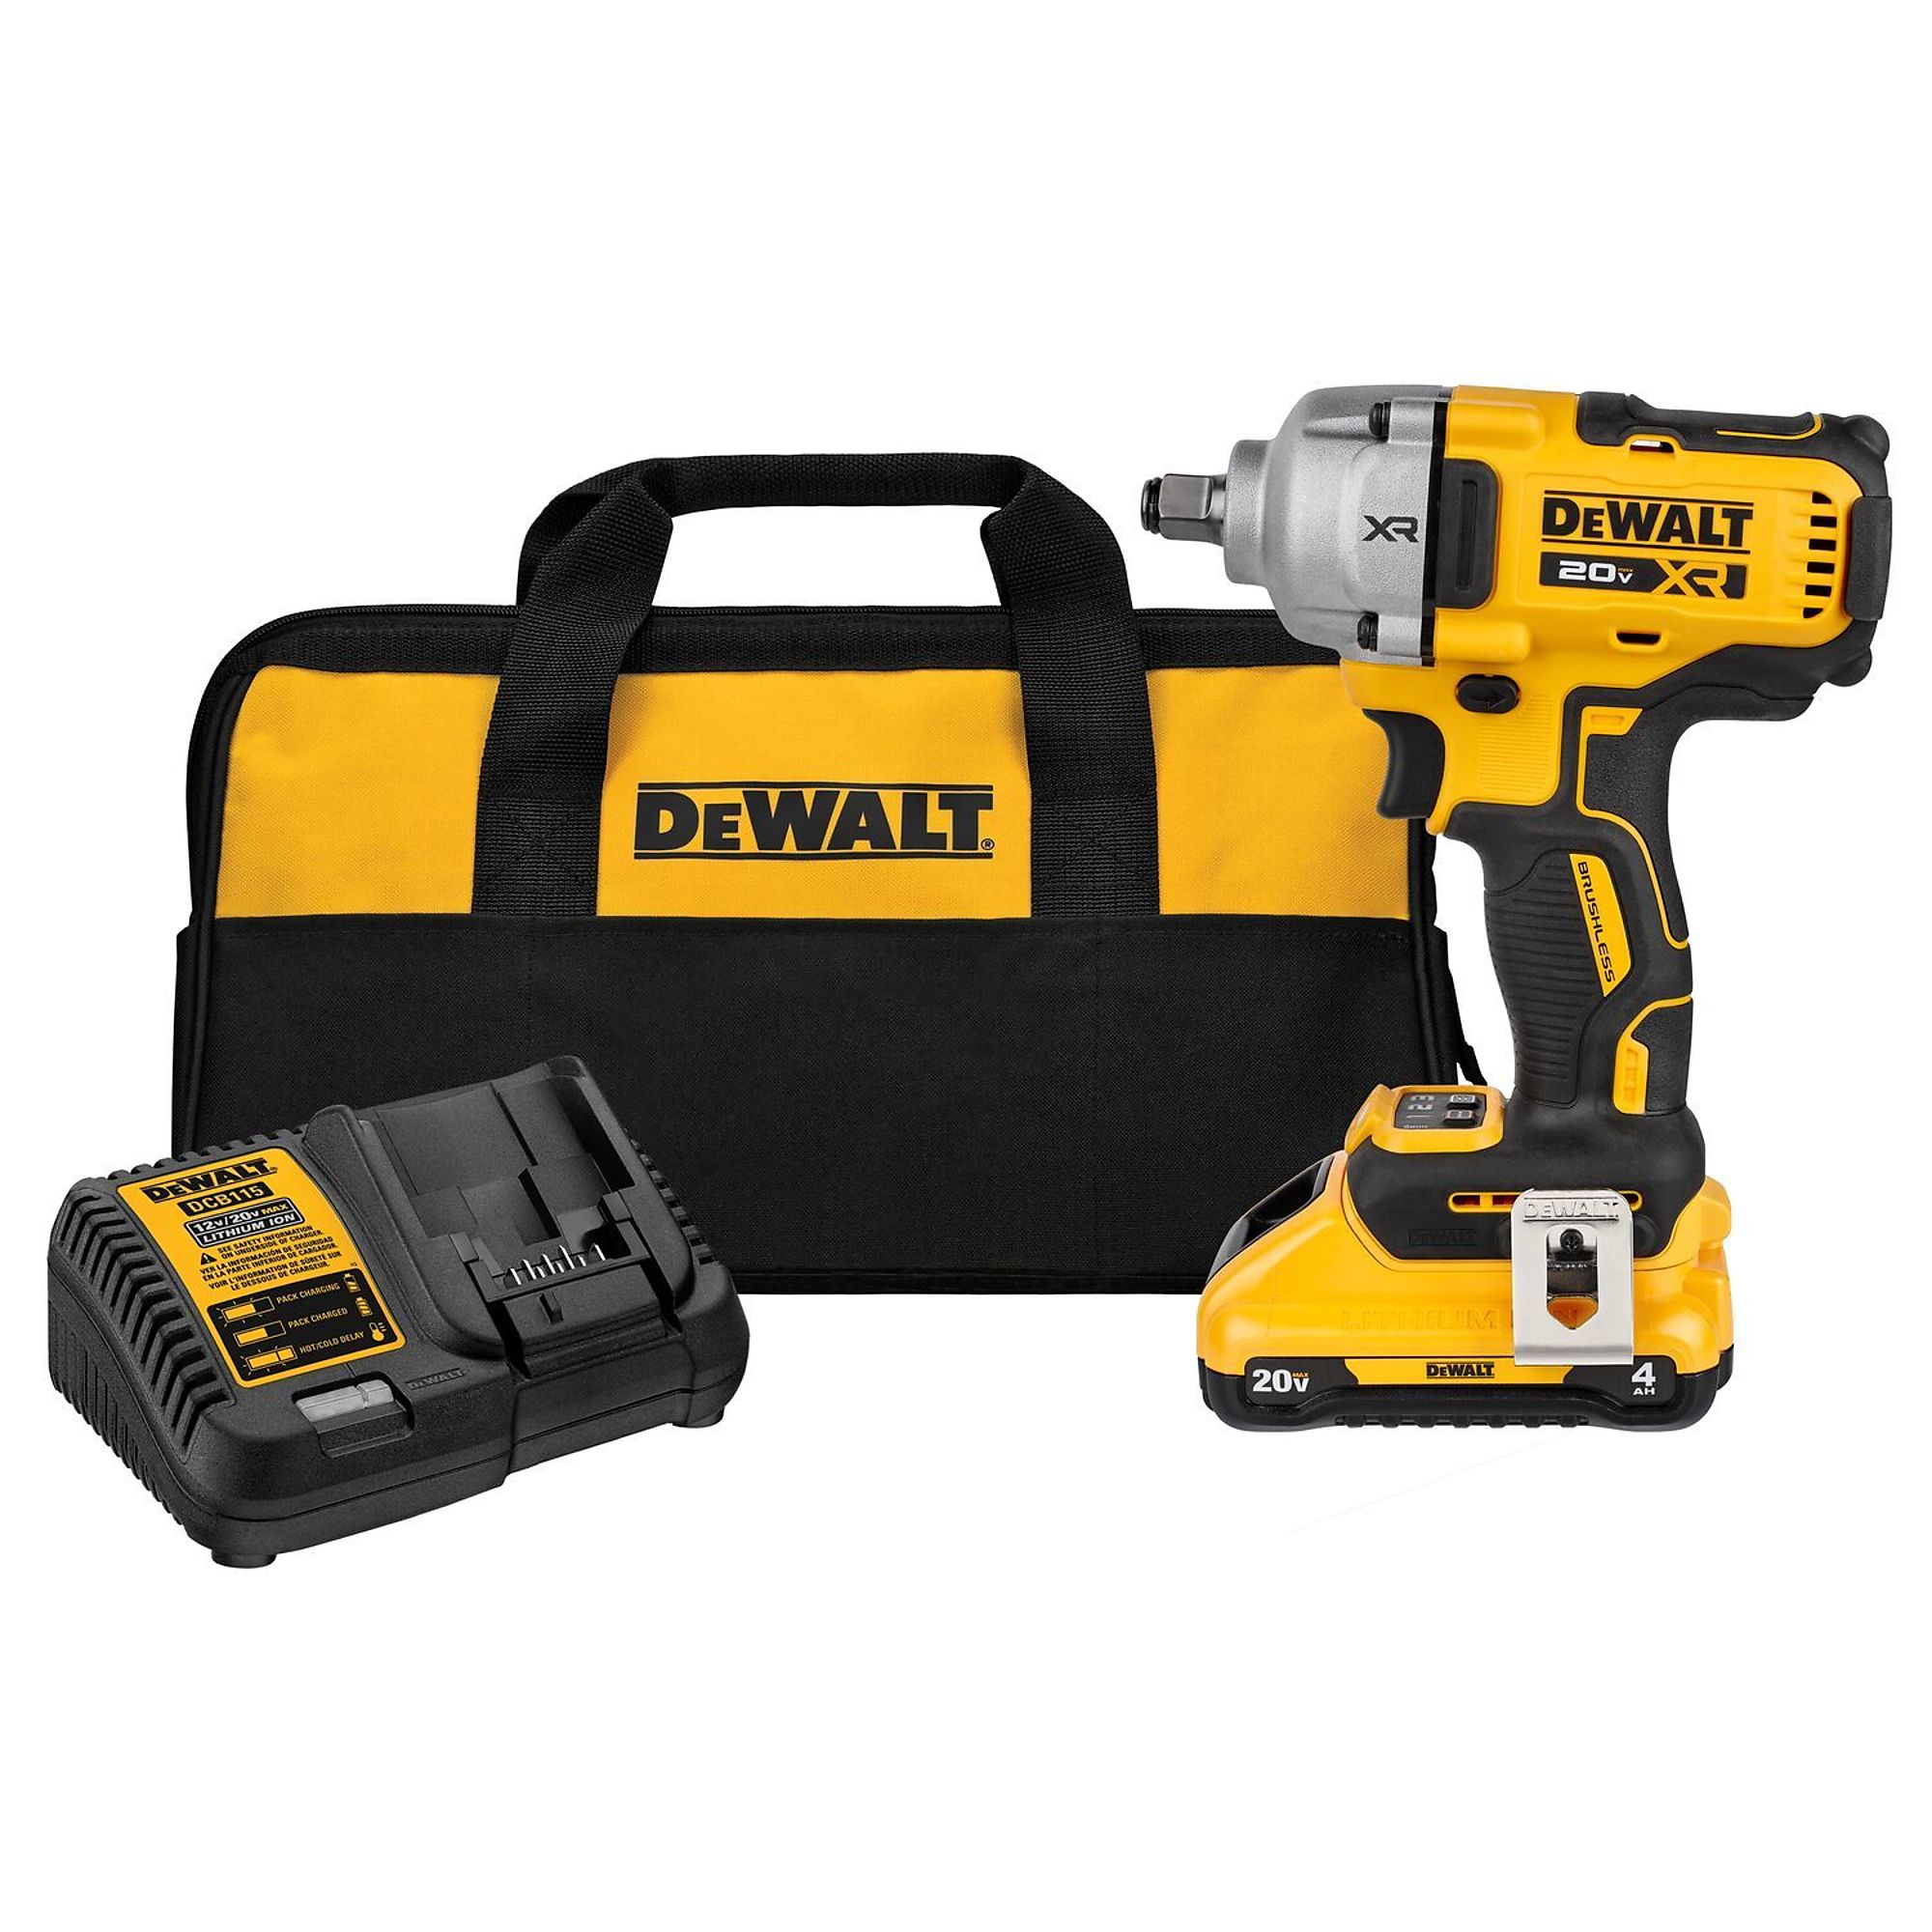 20V MAX* XR 1/2Inch Mid-Range Impact Wrench Kit, Drive Size 1/2 in, Volts 20, Battery Type Lithium-ion, Model - DEWALT DCF891Q1